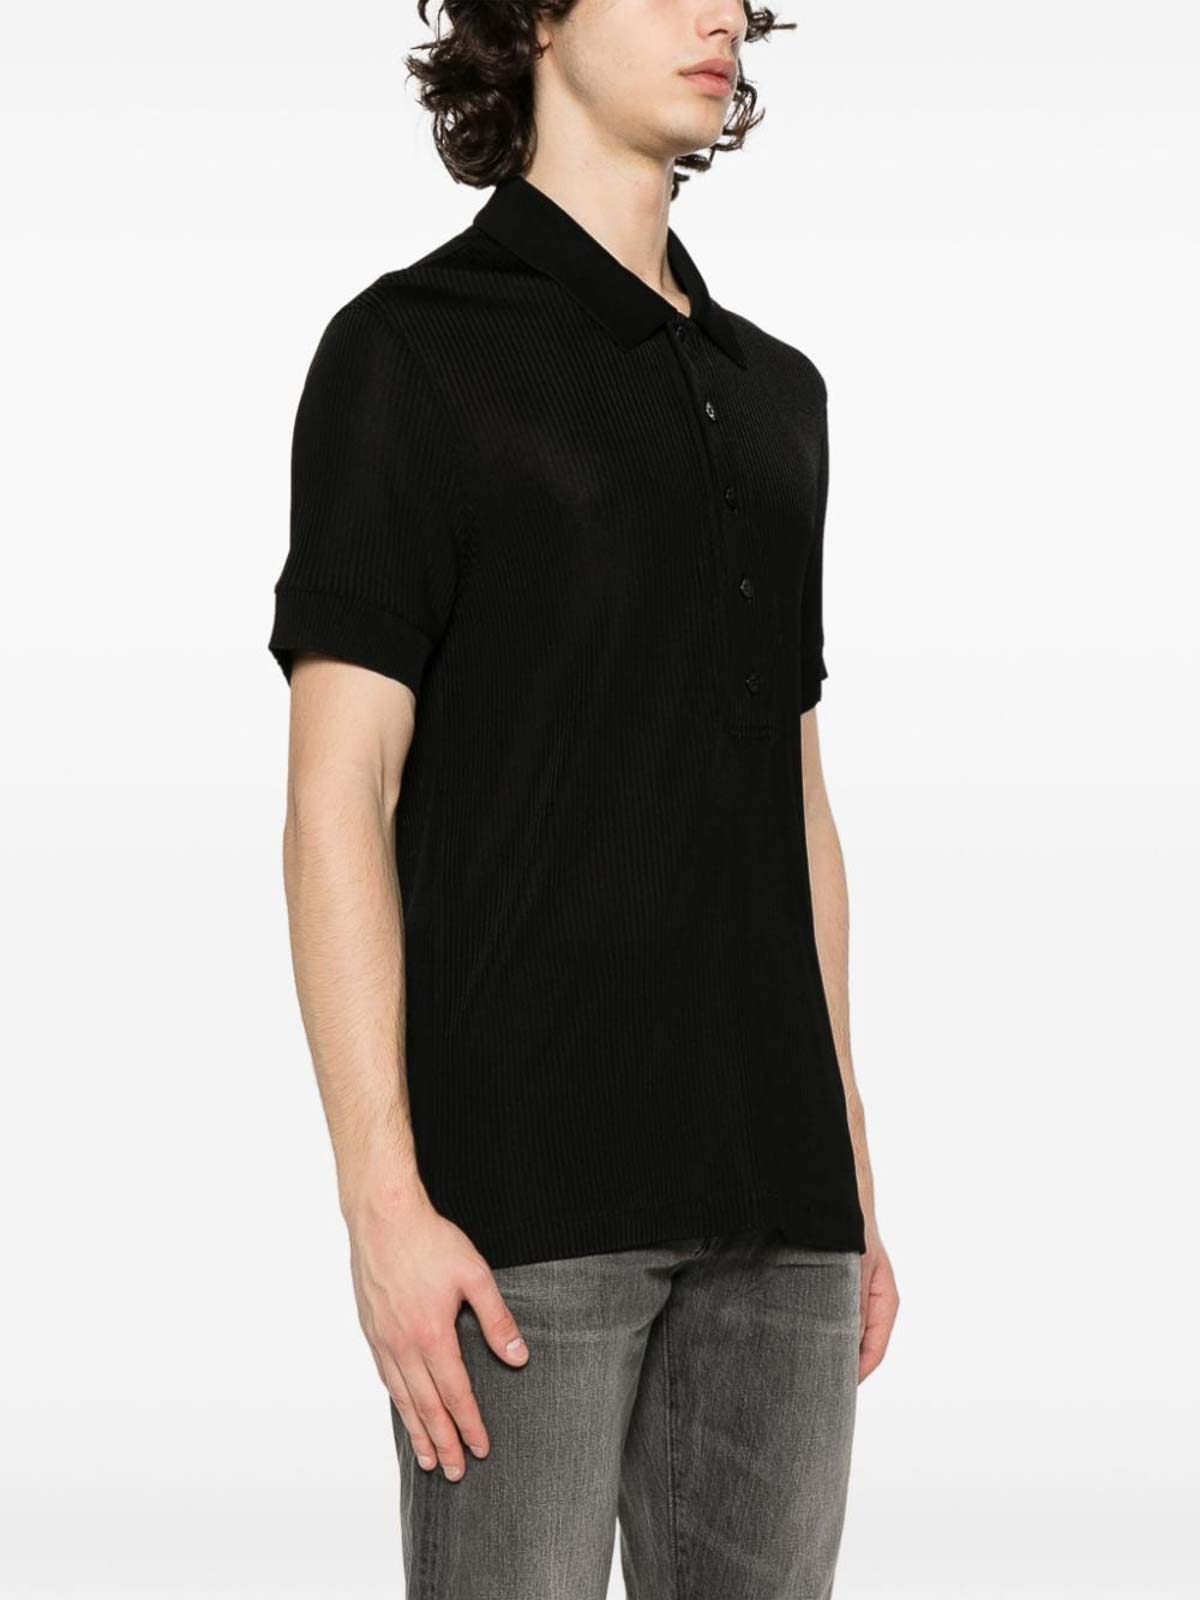 Shop Tom Ford Ribbed Polo Shirt In Black